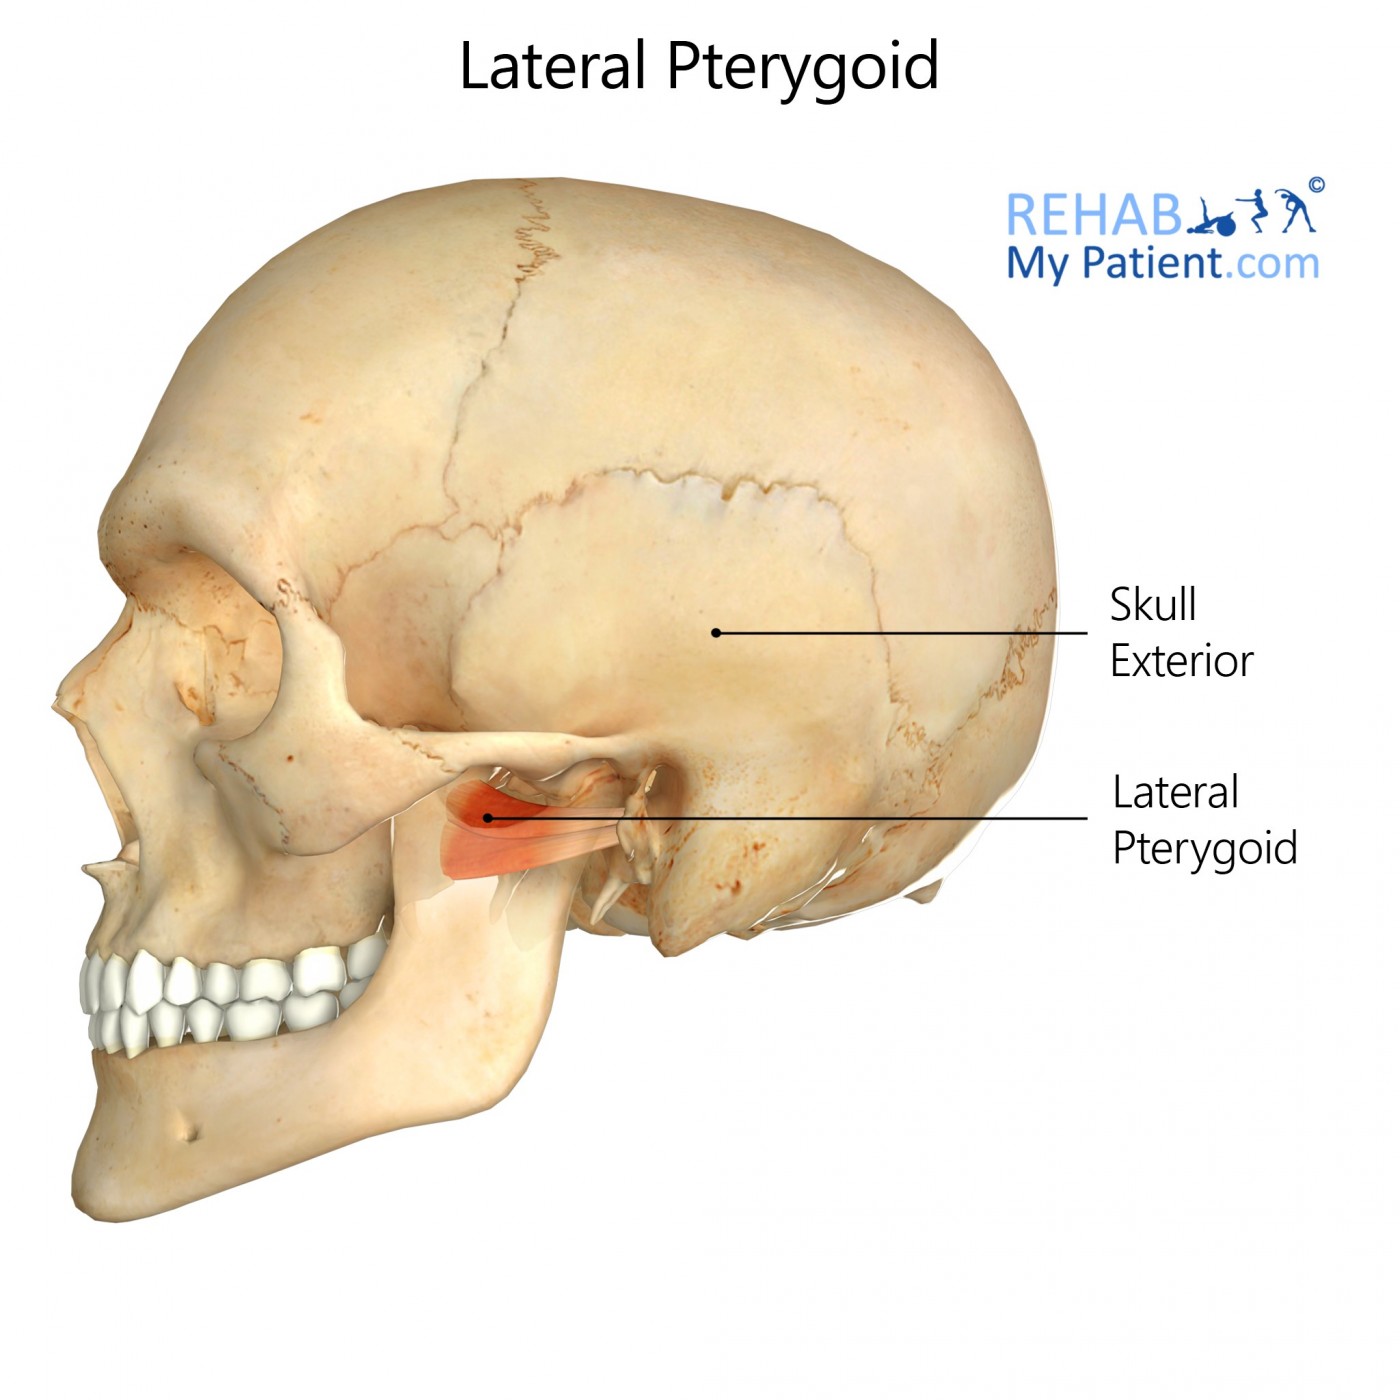 Lateral Pterygoid